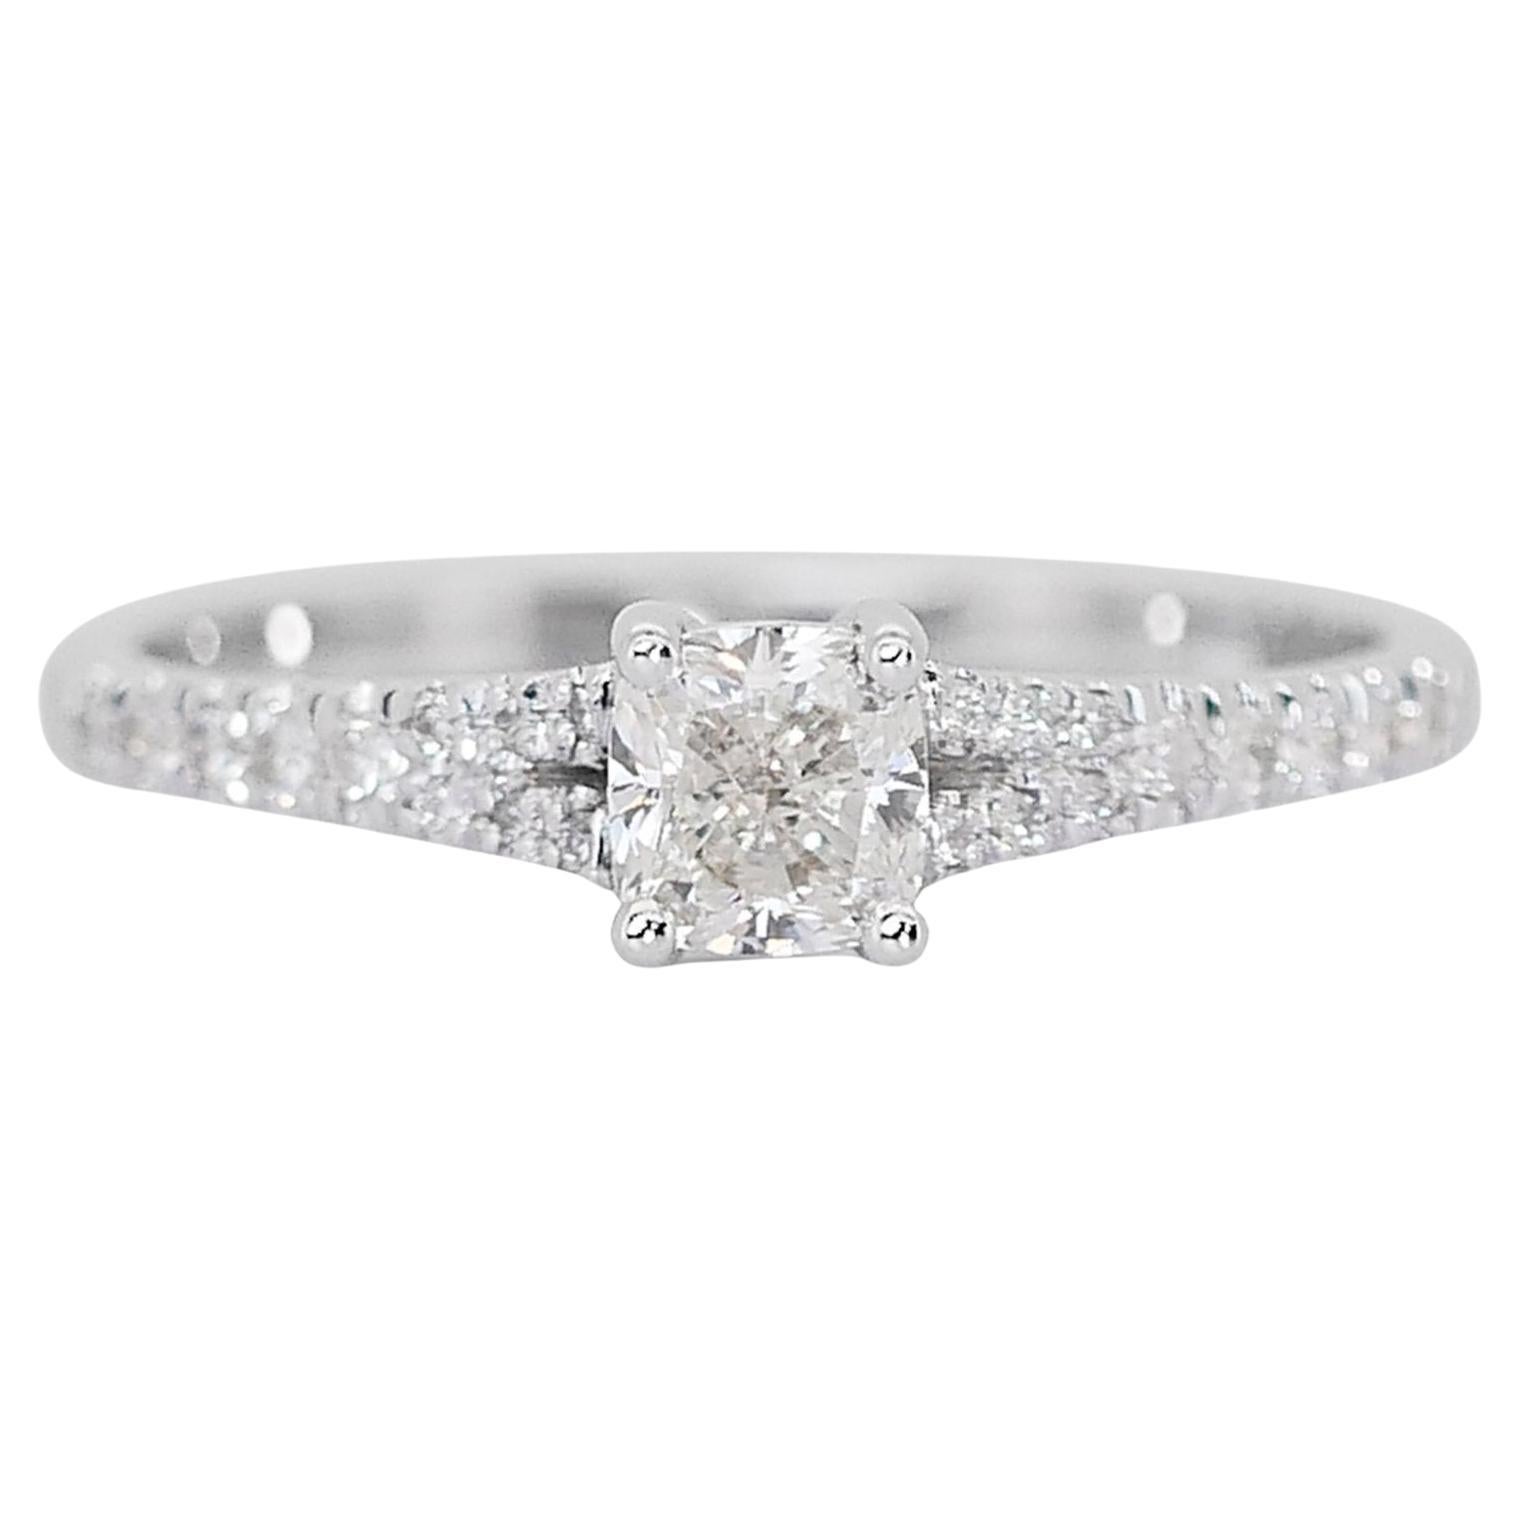 Mesmerizing 1.17ct Diamond Pave Ring in 18k White Gold - GIA Certified For Sale